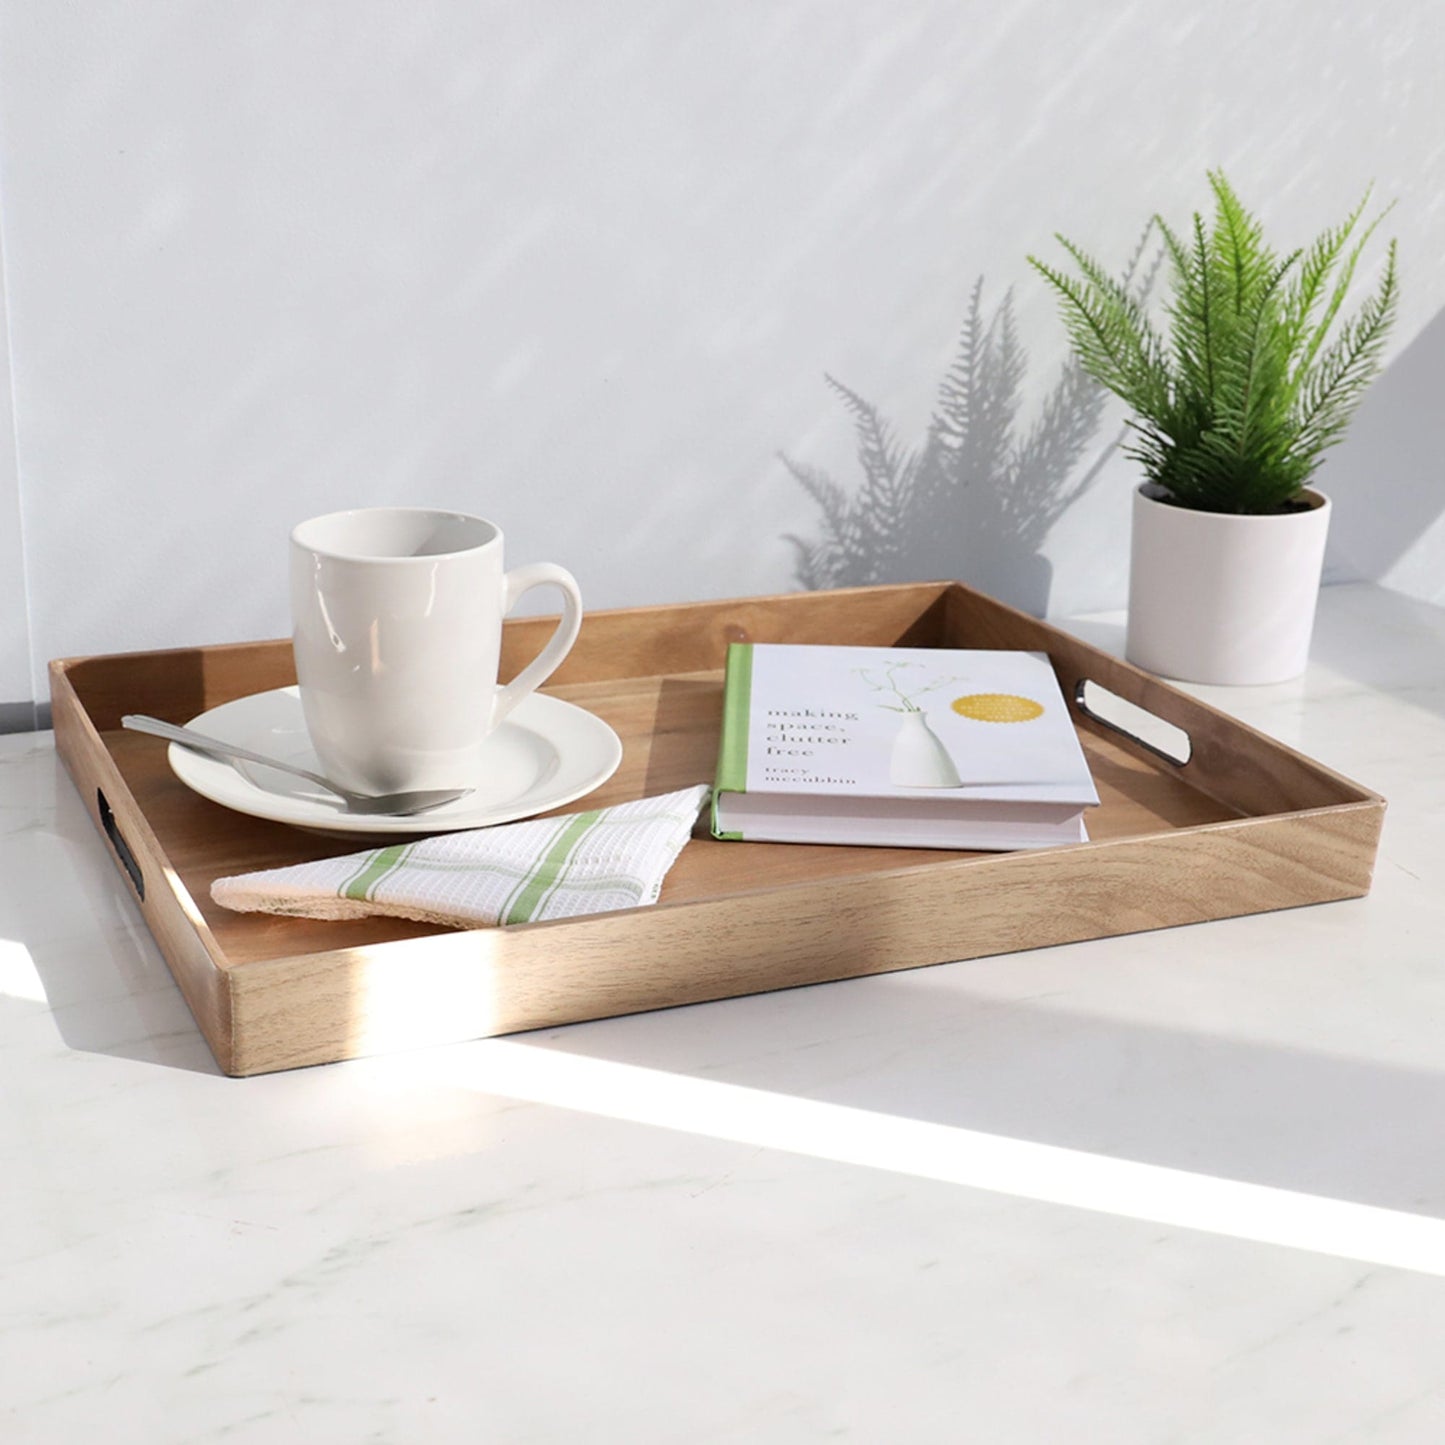 Rustic Wood Like Serving Tray